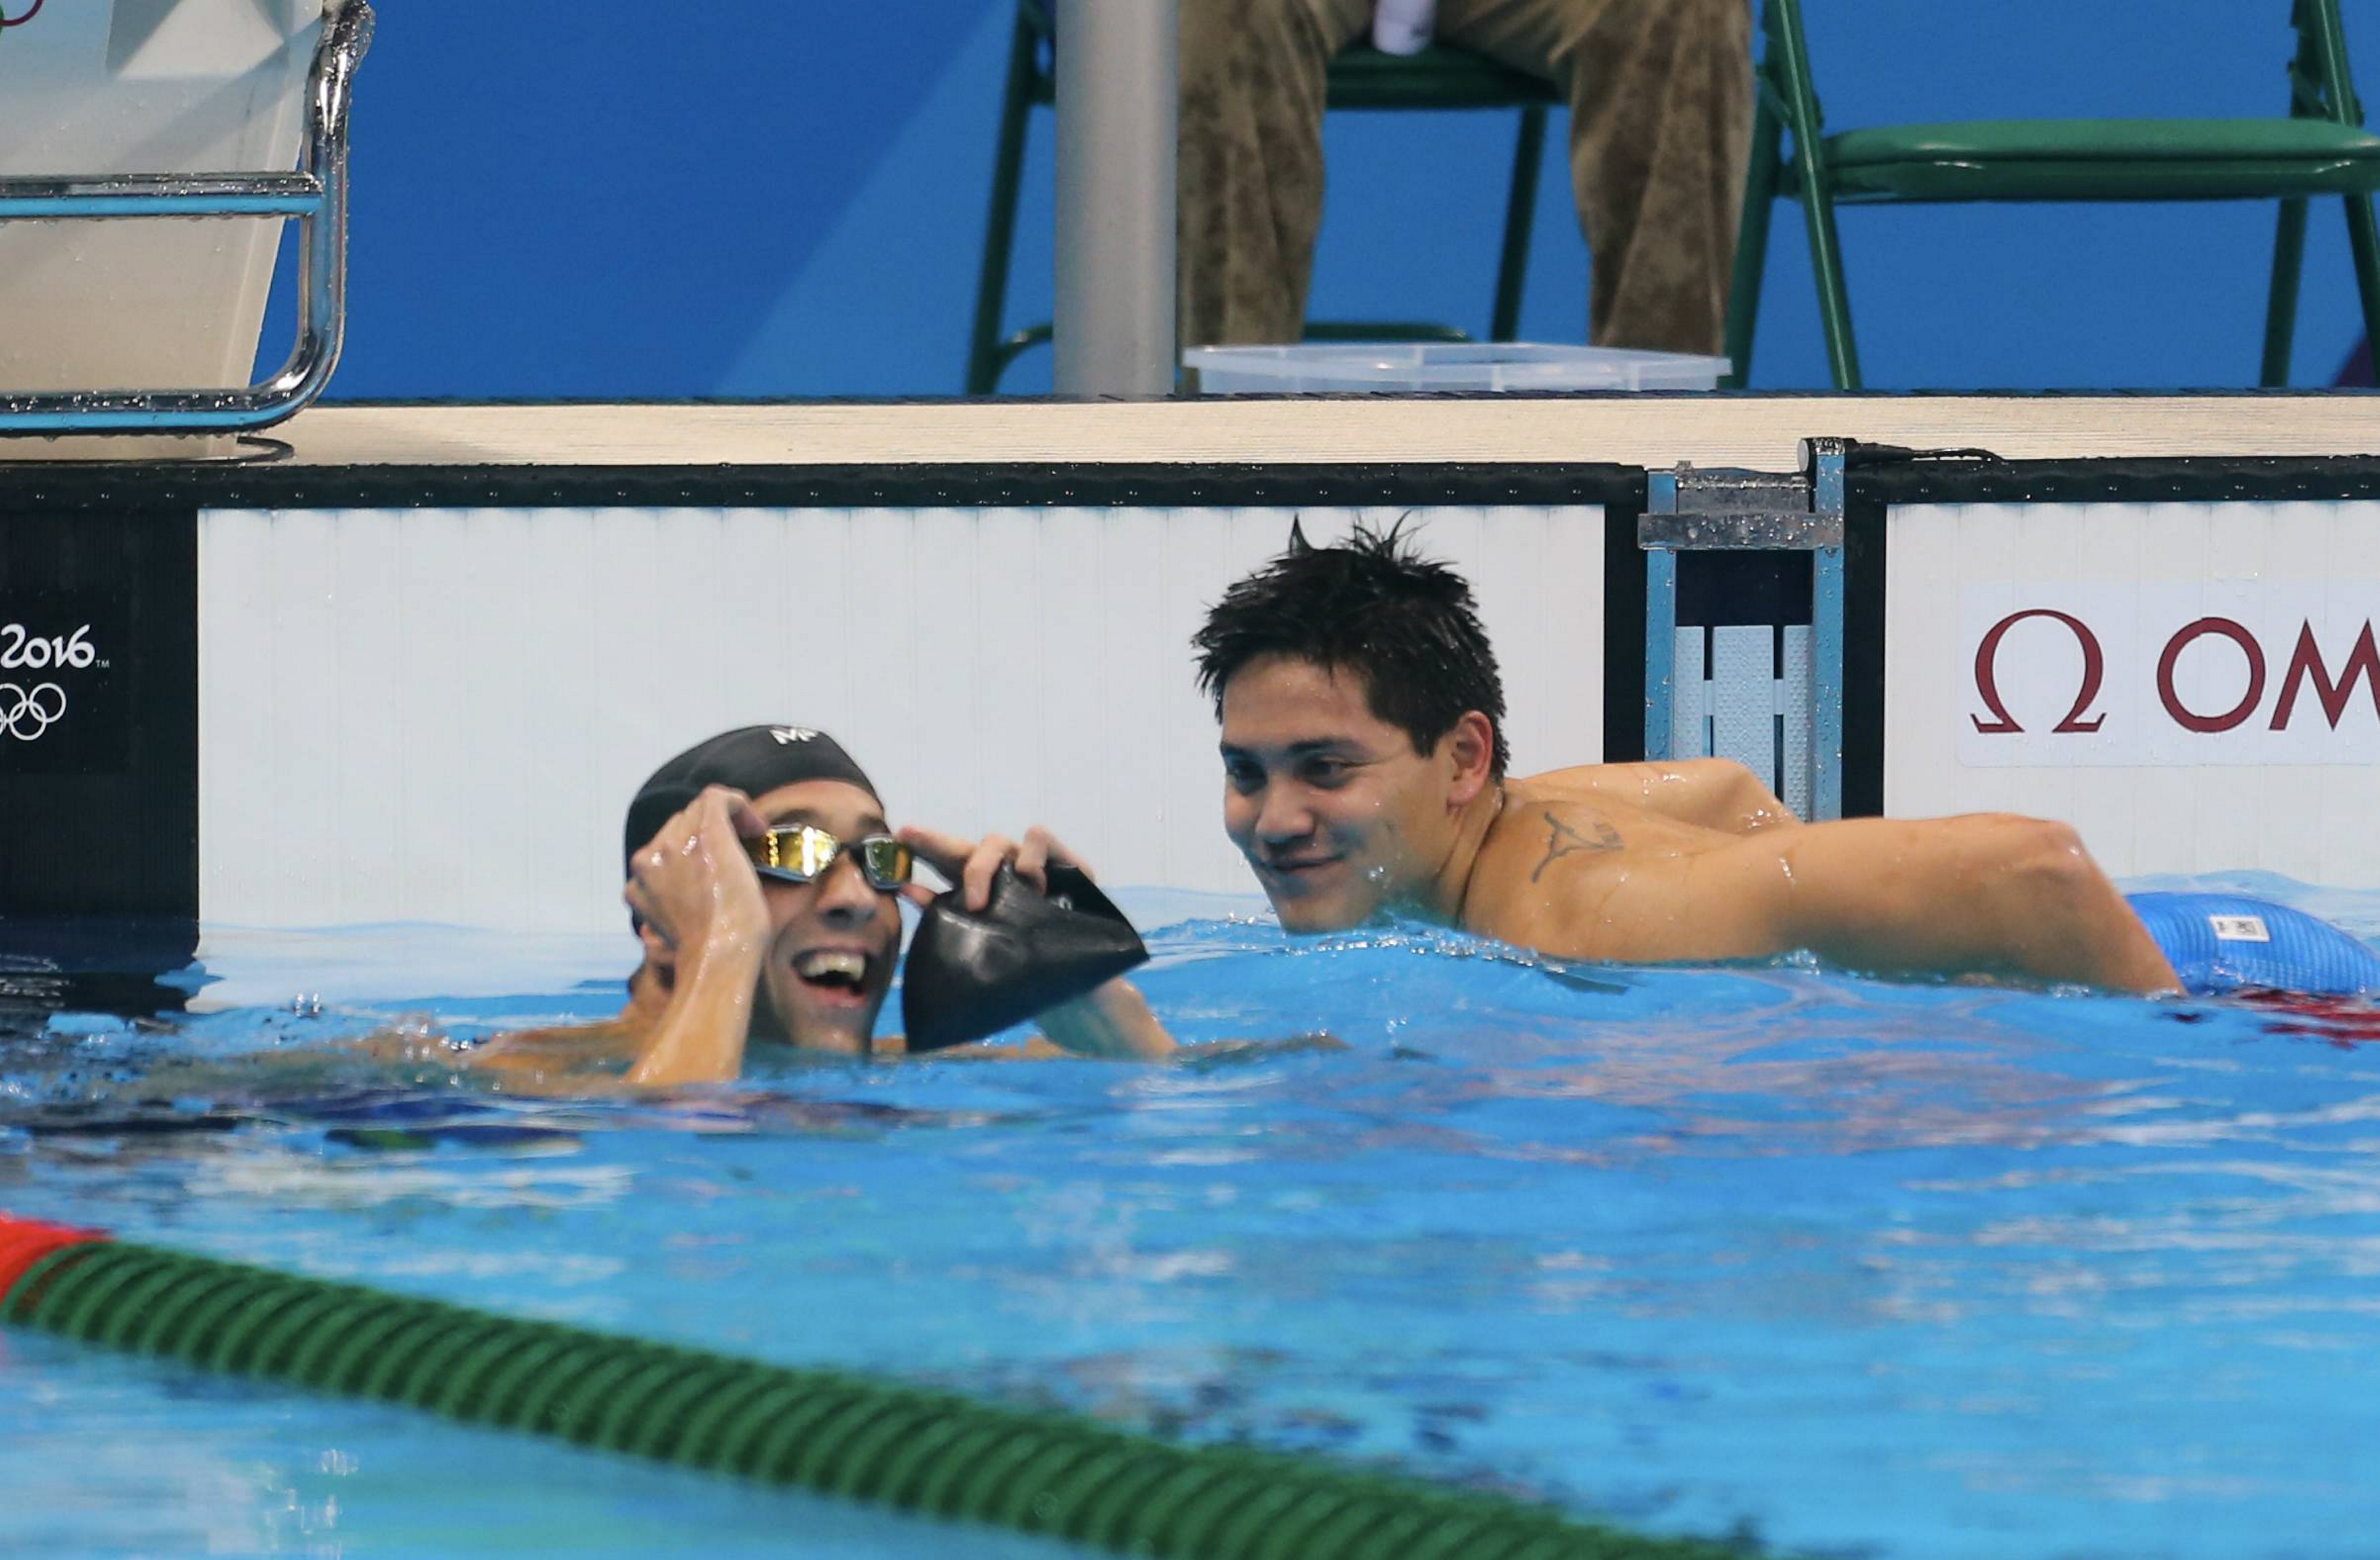 RIO DE JANEIRO, BRAZIL - AUGUST 12: Joseph Schooling of Singapour celebrates his victory with Michael Phelps of United States after the final men's 100m Butterfly at Olympic Aquatics Stadium on August 12, 2016 in Rio de Janeiro, Brazil. (Photo by Xavier Laine/Getty Images)